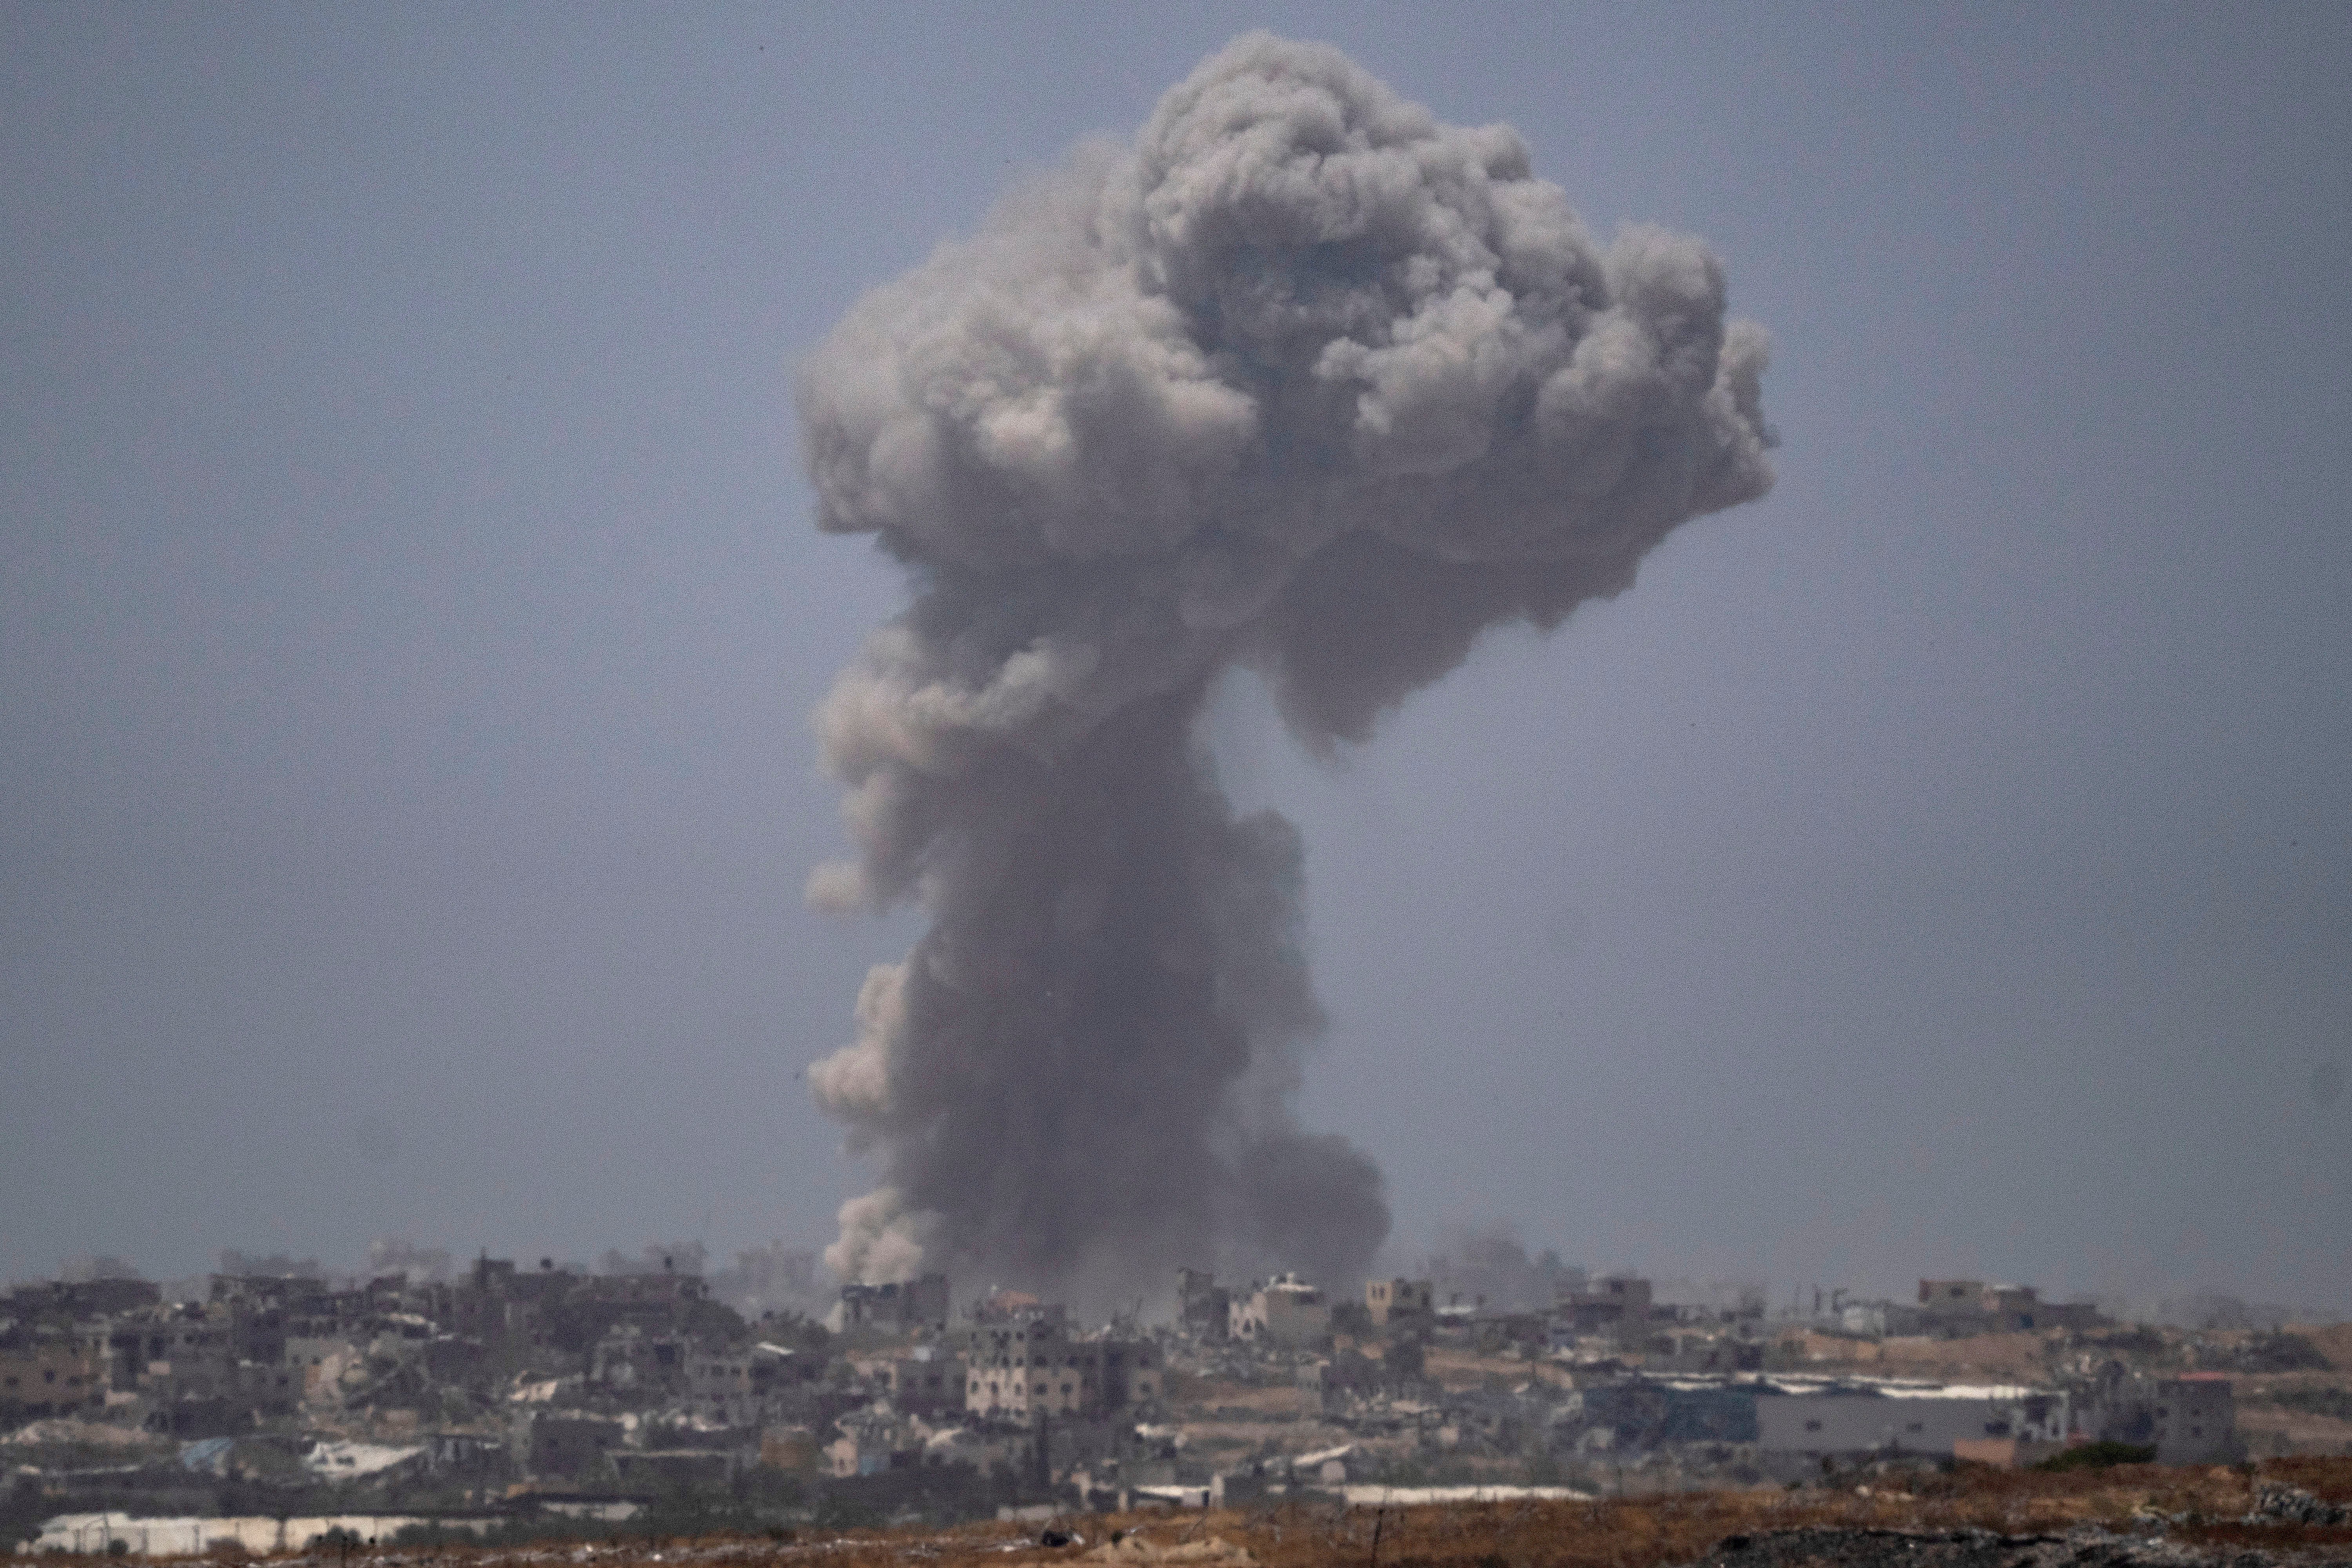 Gaza has been under continuous bombardment since October